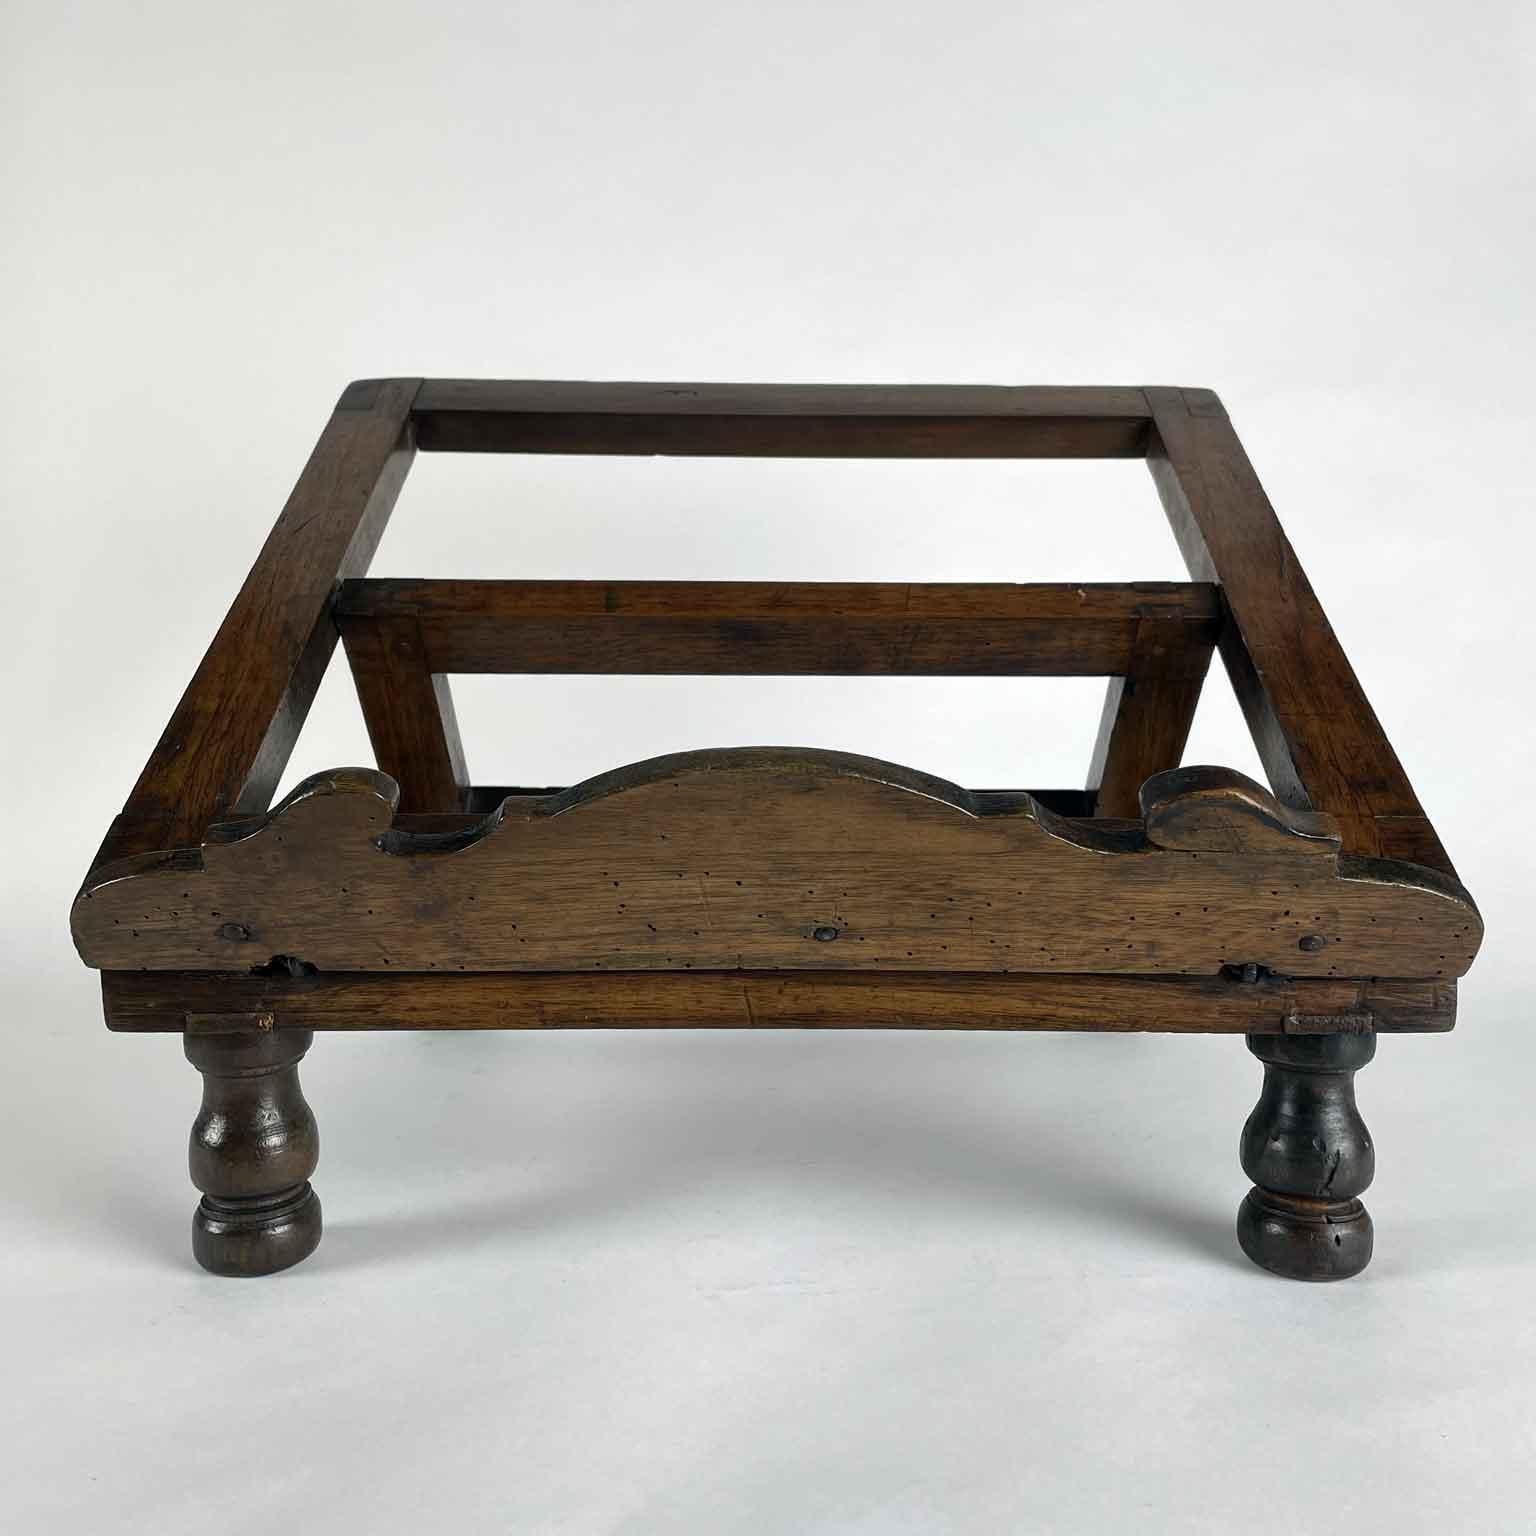 From Italy an early 19th century carved table lectern, an antique rectangular walnut bookstand or music stand on four turned feet. This antique reading bookstand is adjustable and the support allowing the lectern to be placed flat or at different